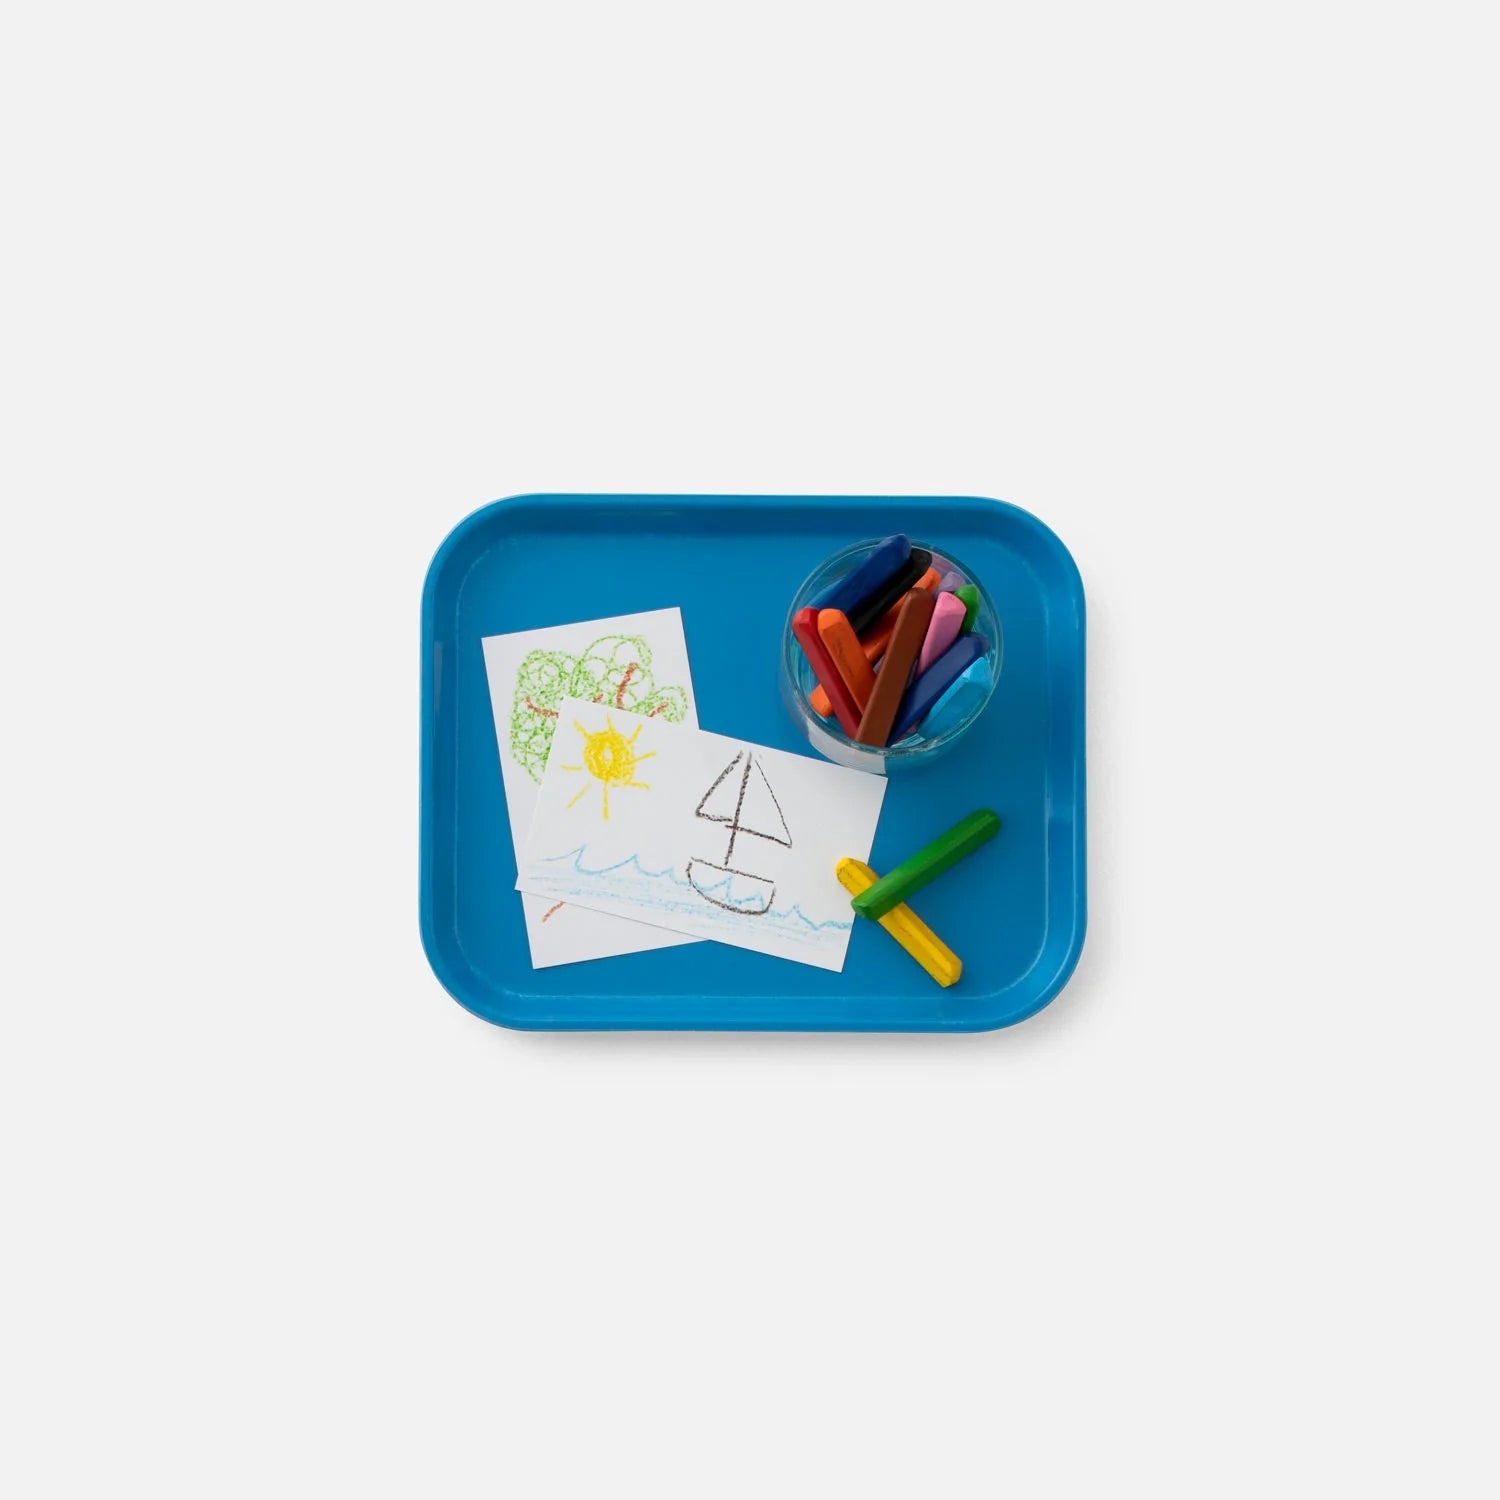 A Montessori-inspired tray for kids.